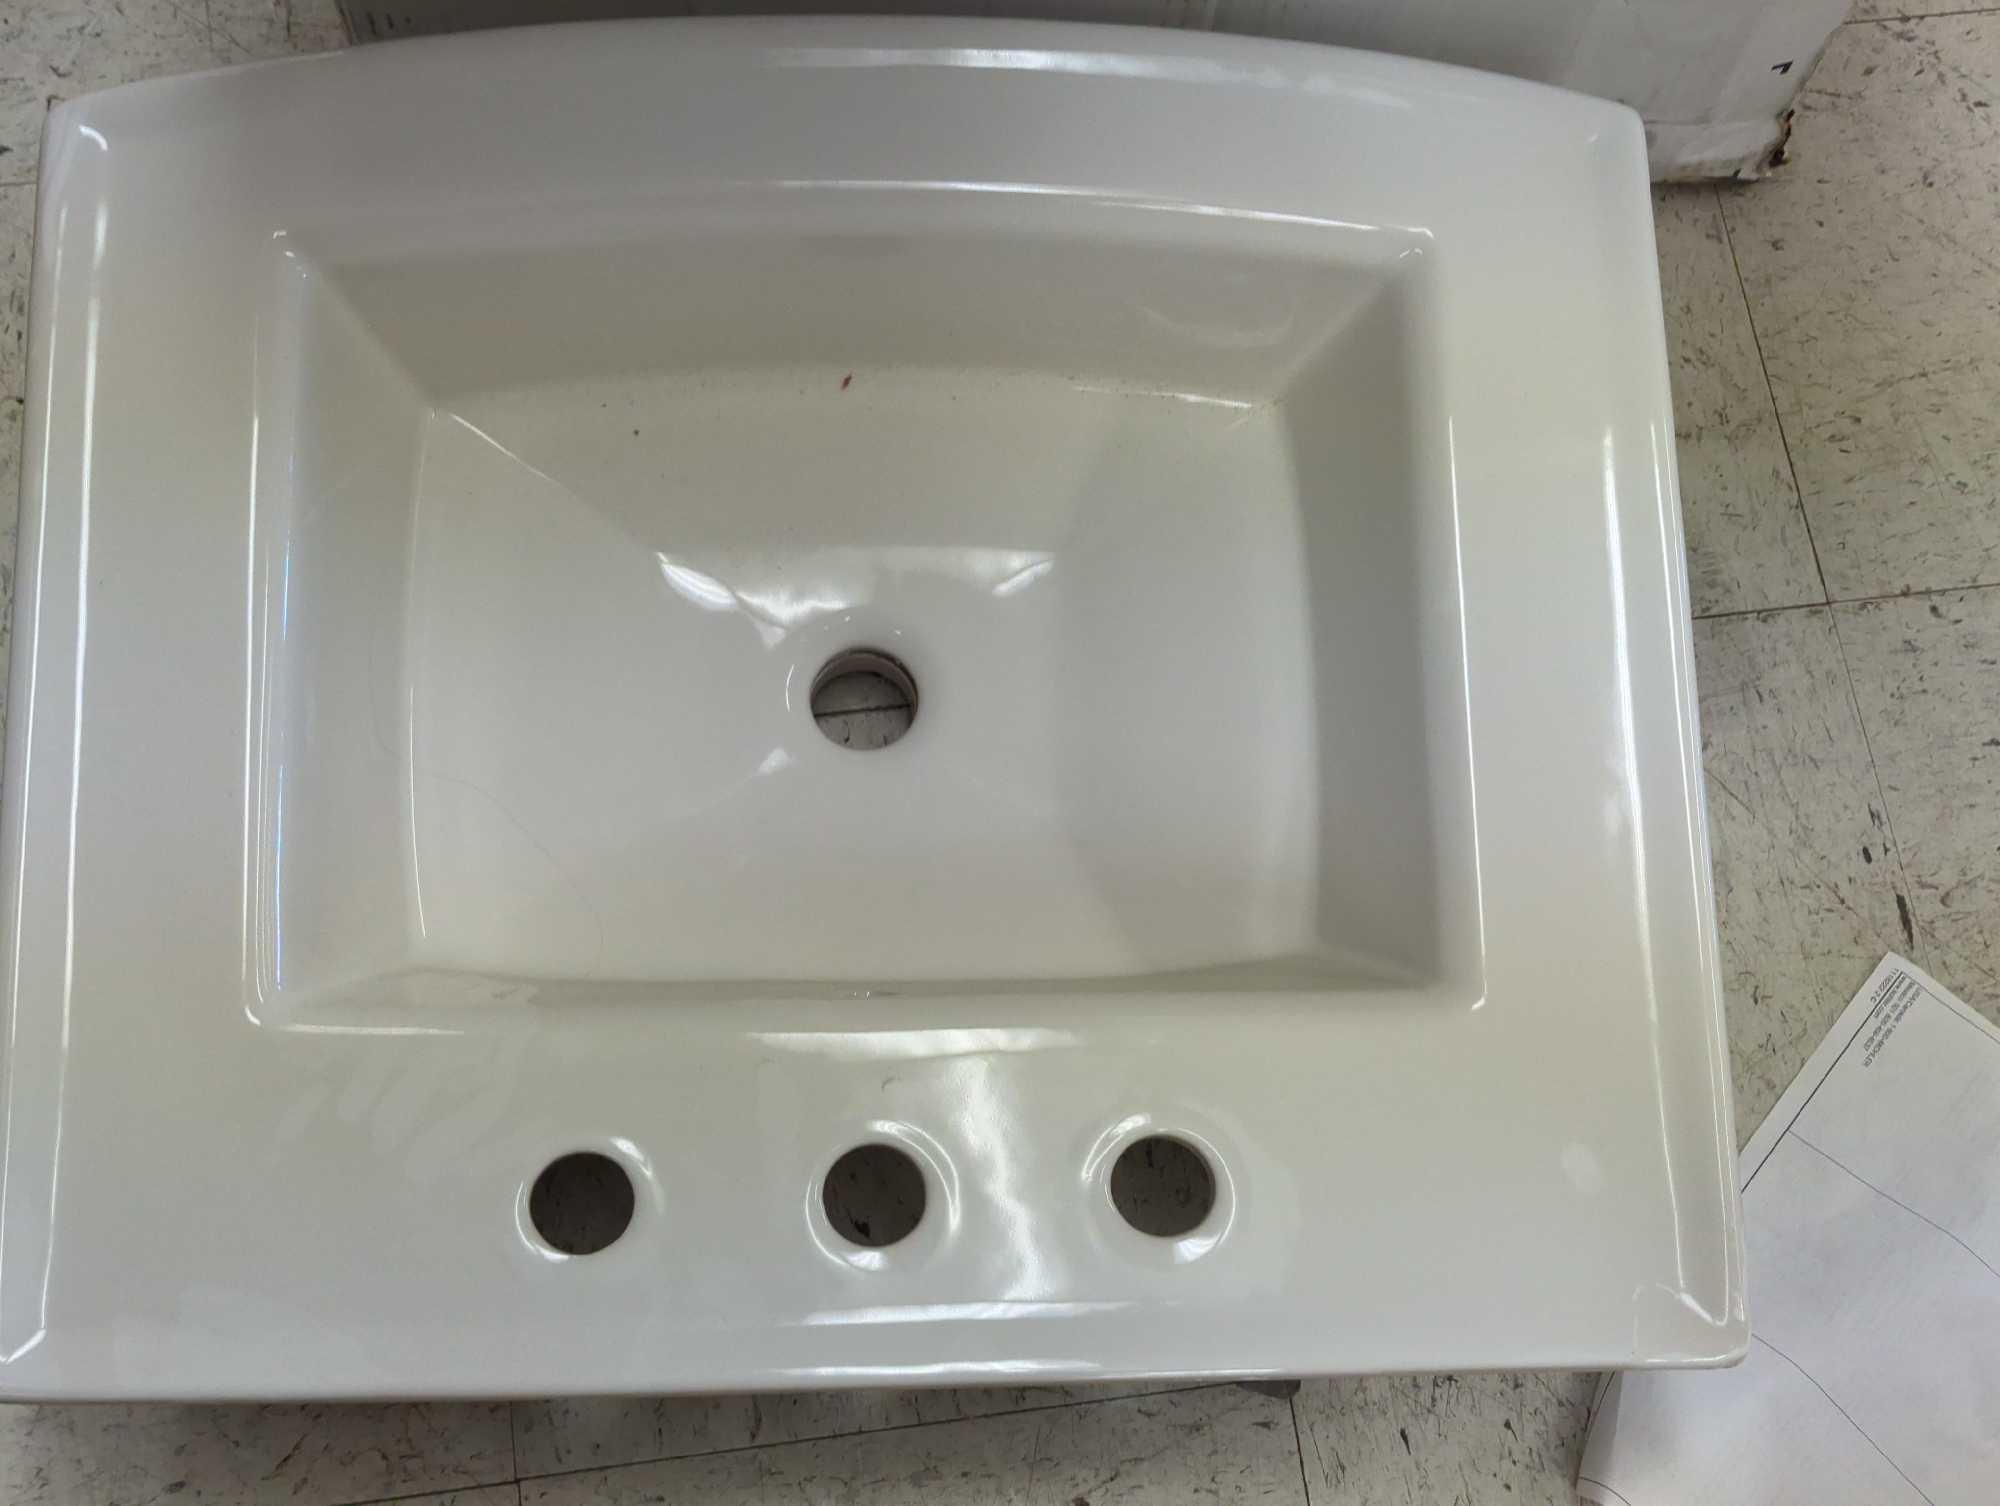 KOHLER Archer 7.87 in. Vitreous China Pedestal Sink Basin in White with Overflow Drain, Appears to